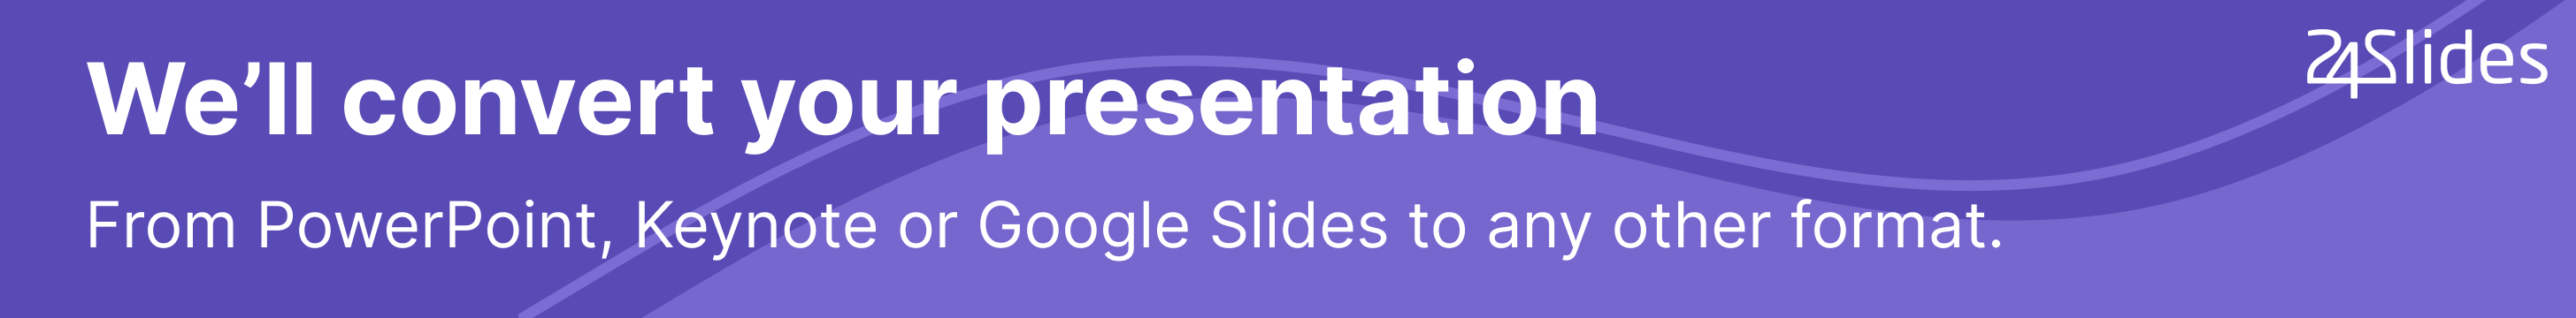 Leaderboard PowerPoint and Google Slides Template - PPT Slides